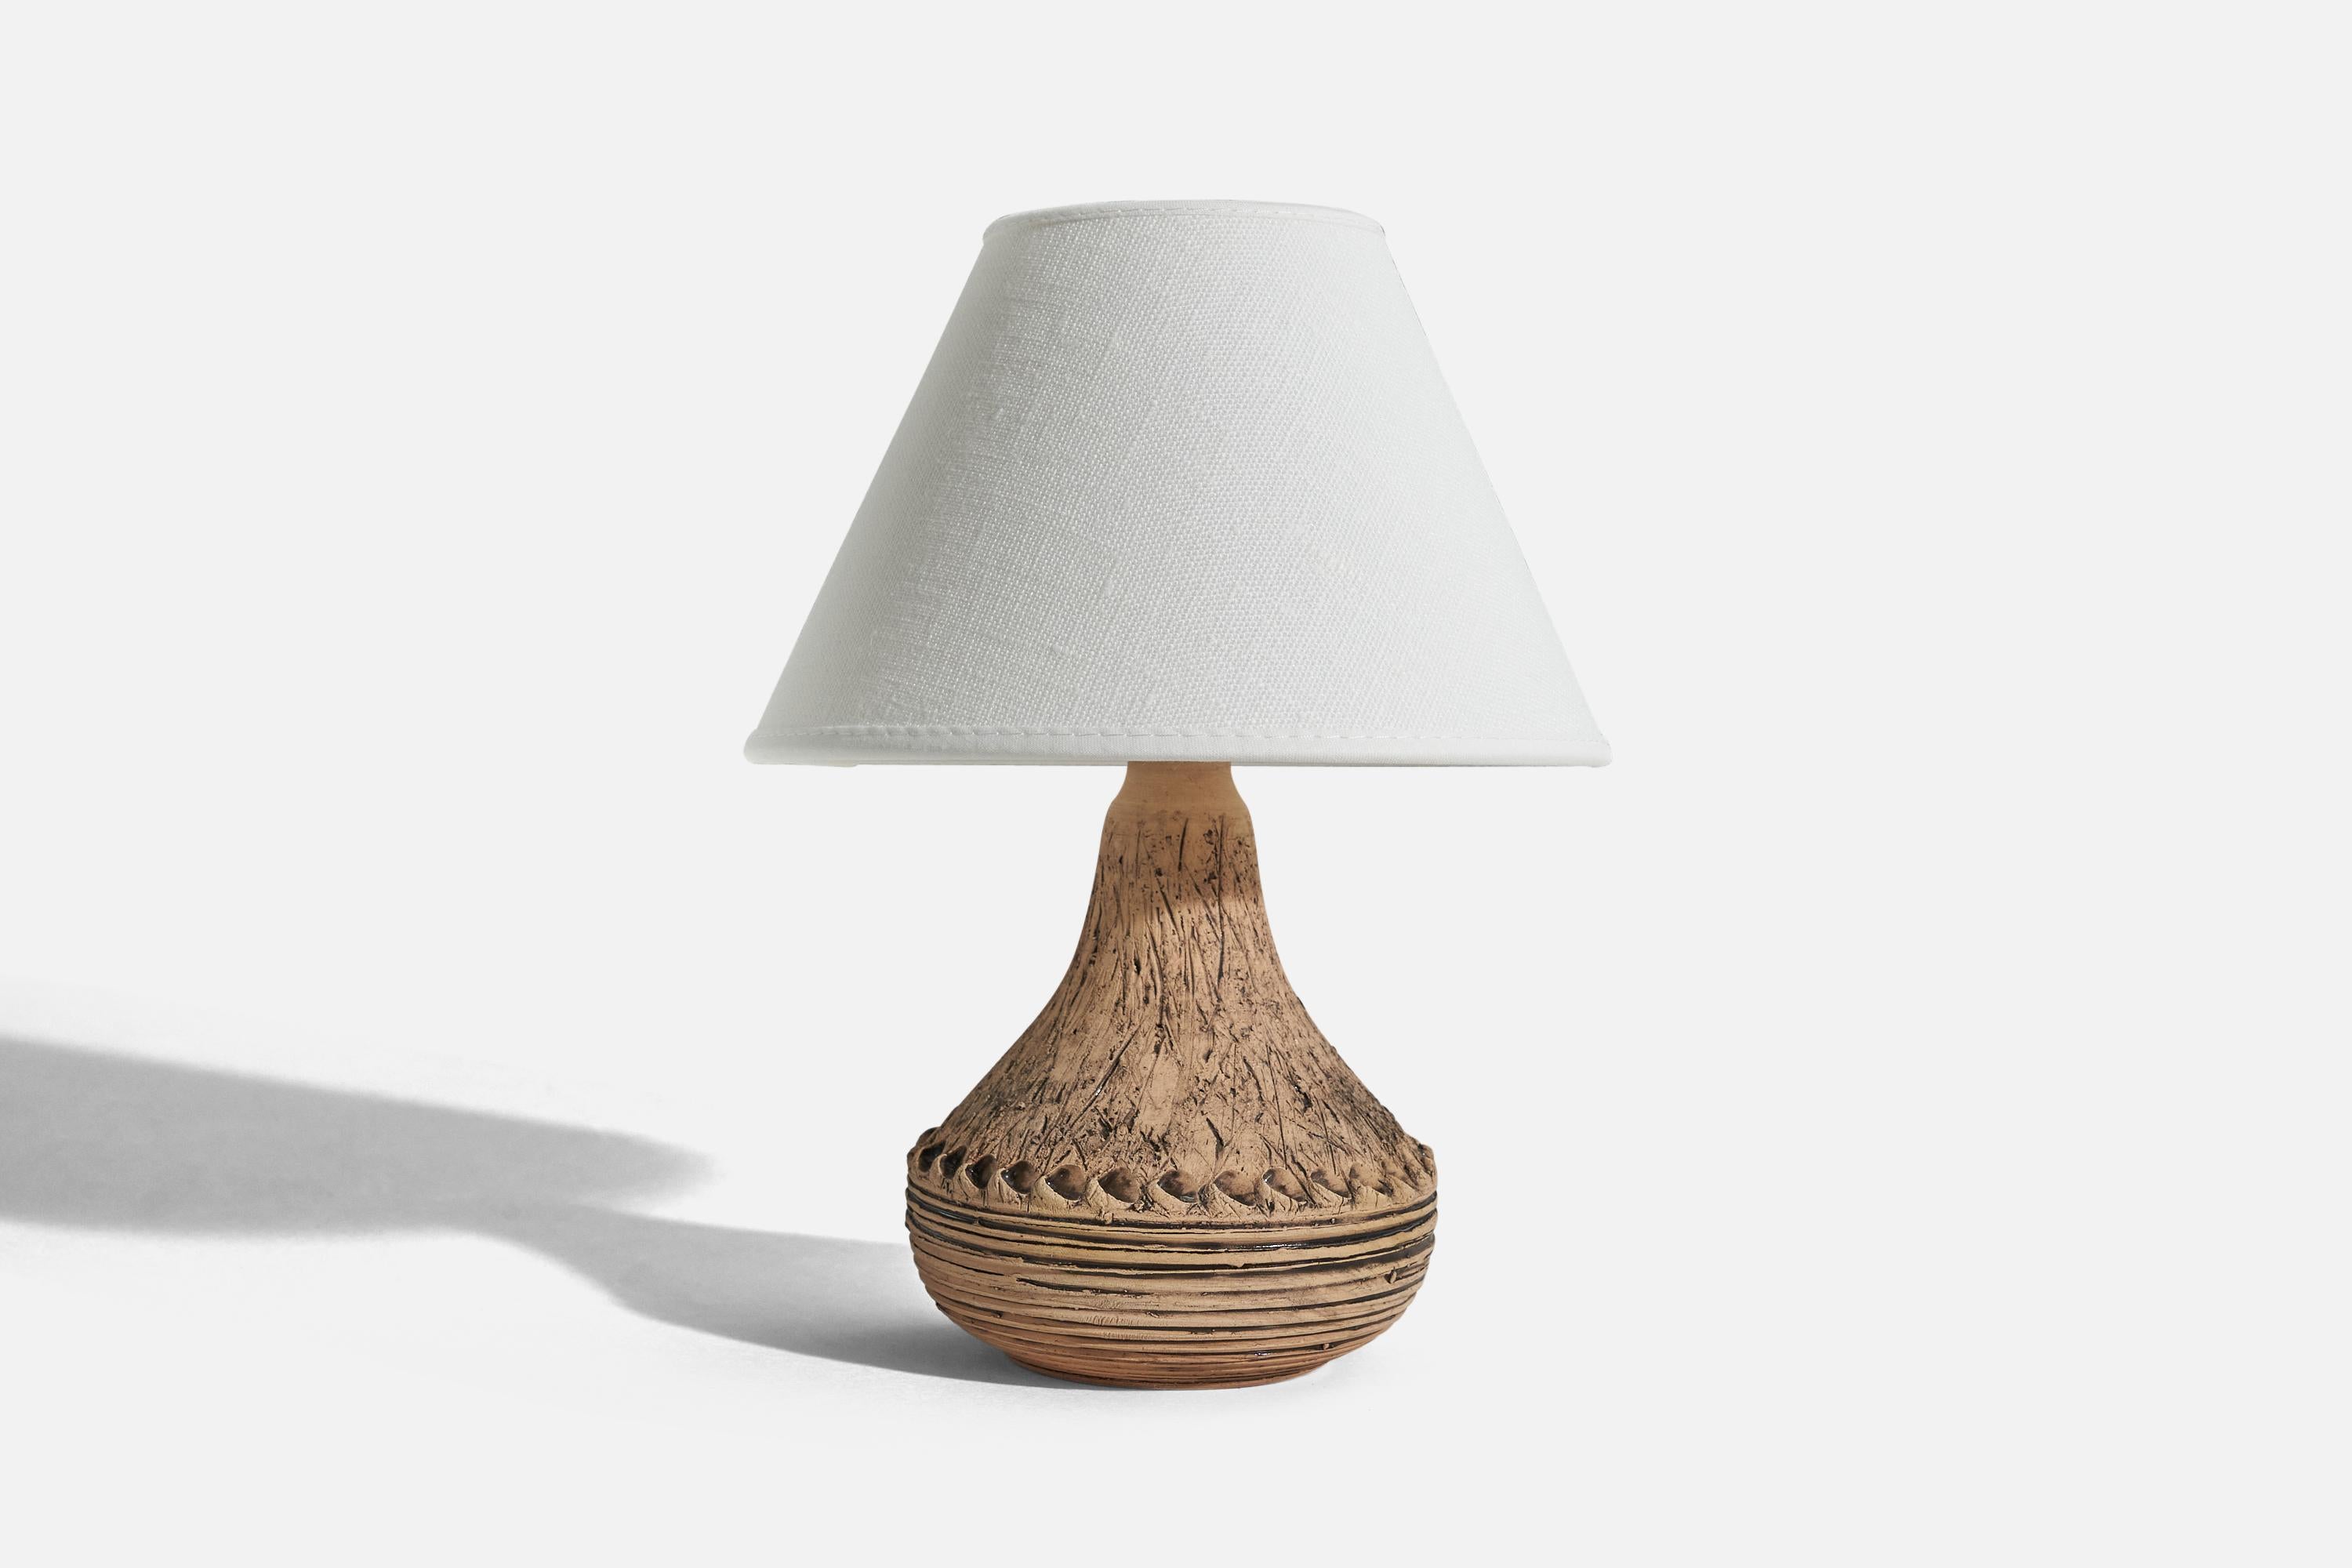 A brown, earthenware table lamp designed by Olof Georg Hermansson and produced by his own studio 